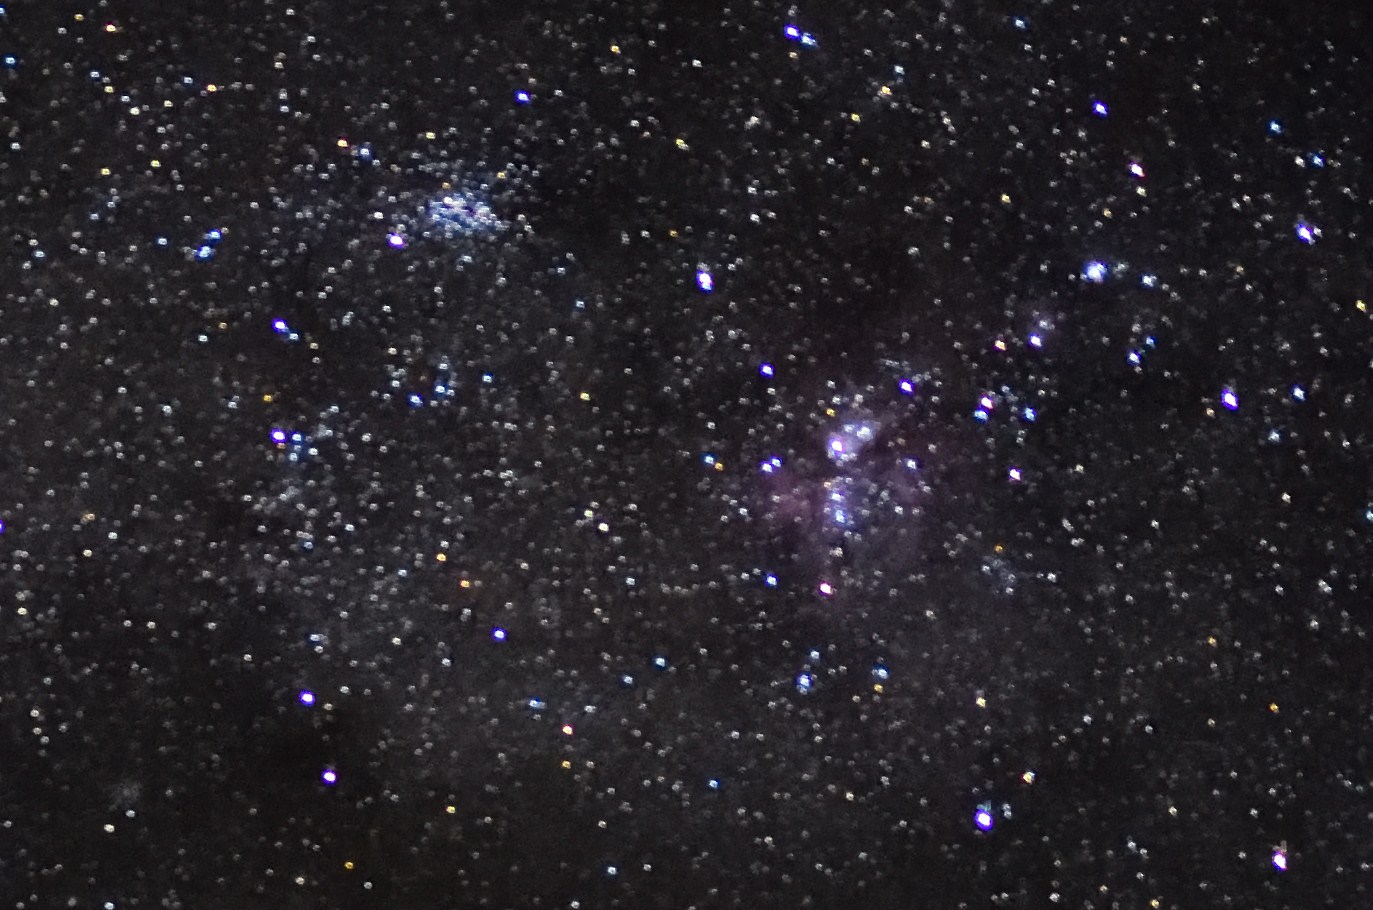 Sigma 18-35mm f/1.8 stargazing Art Crux and NGC 3766 cropped